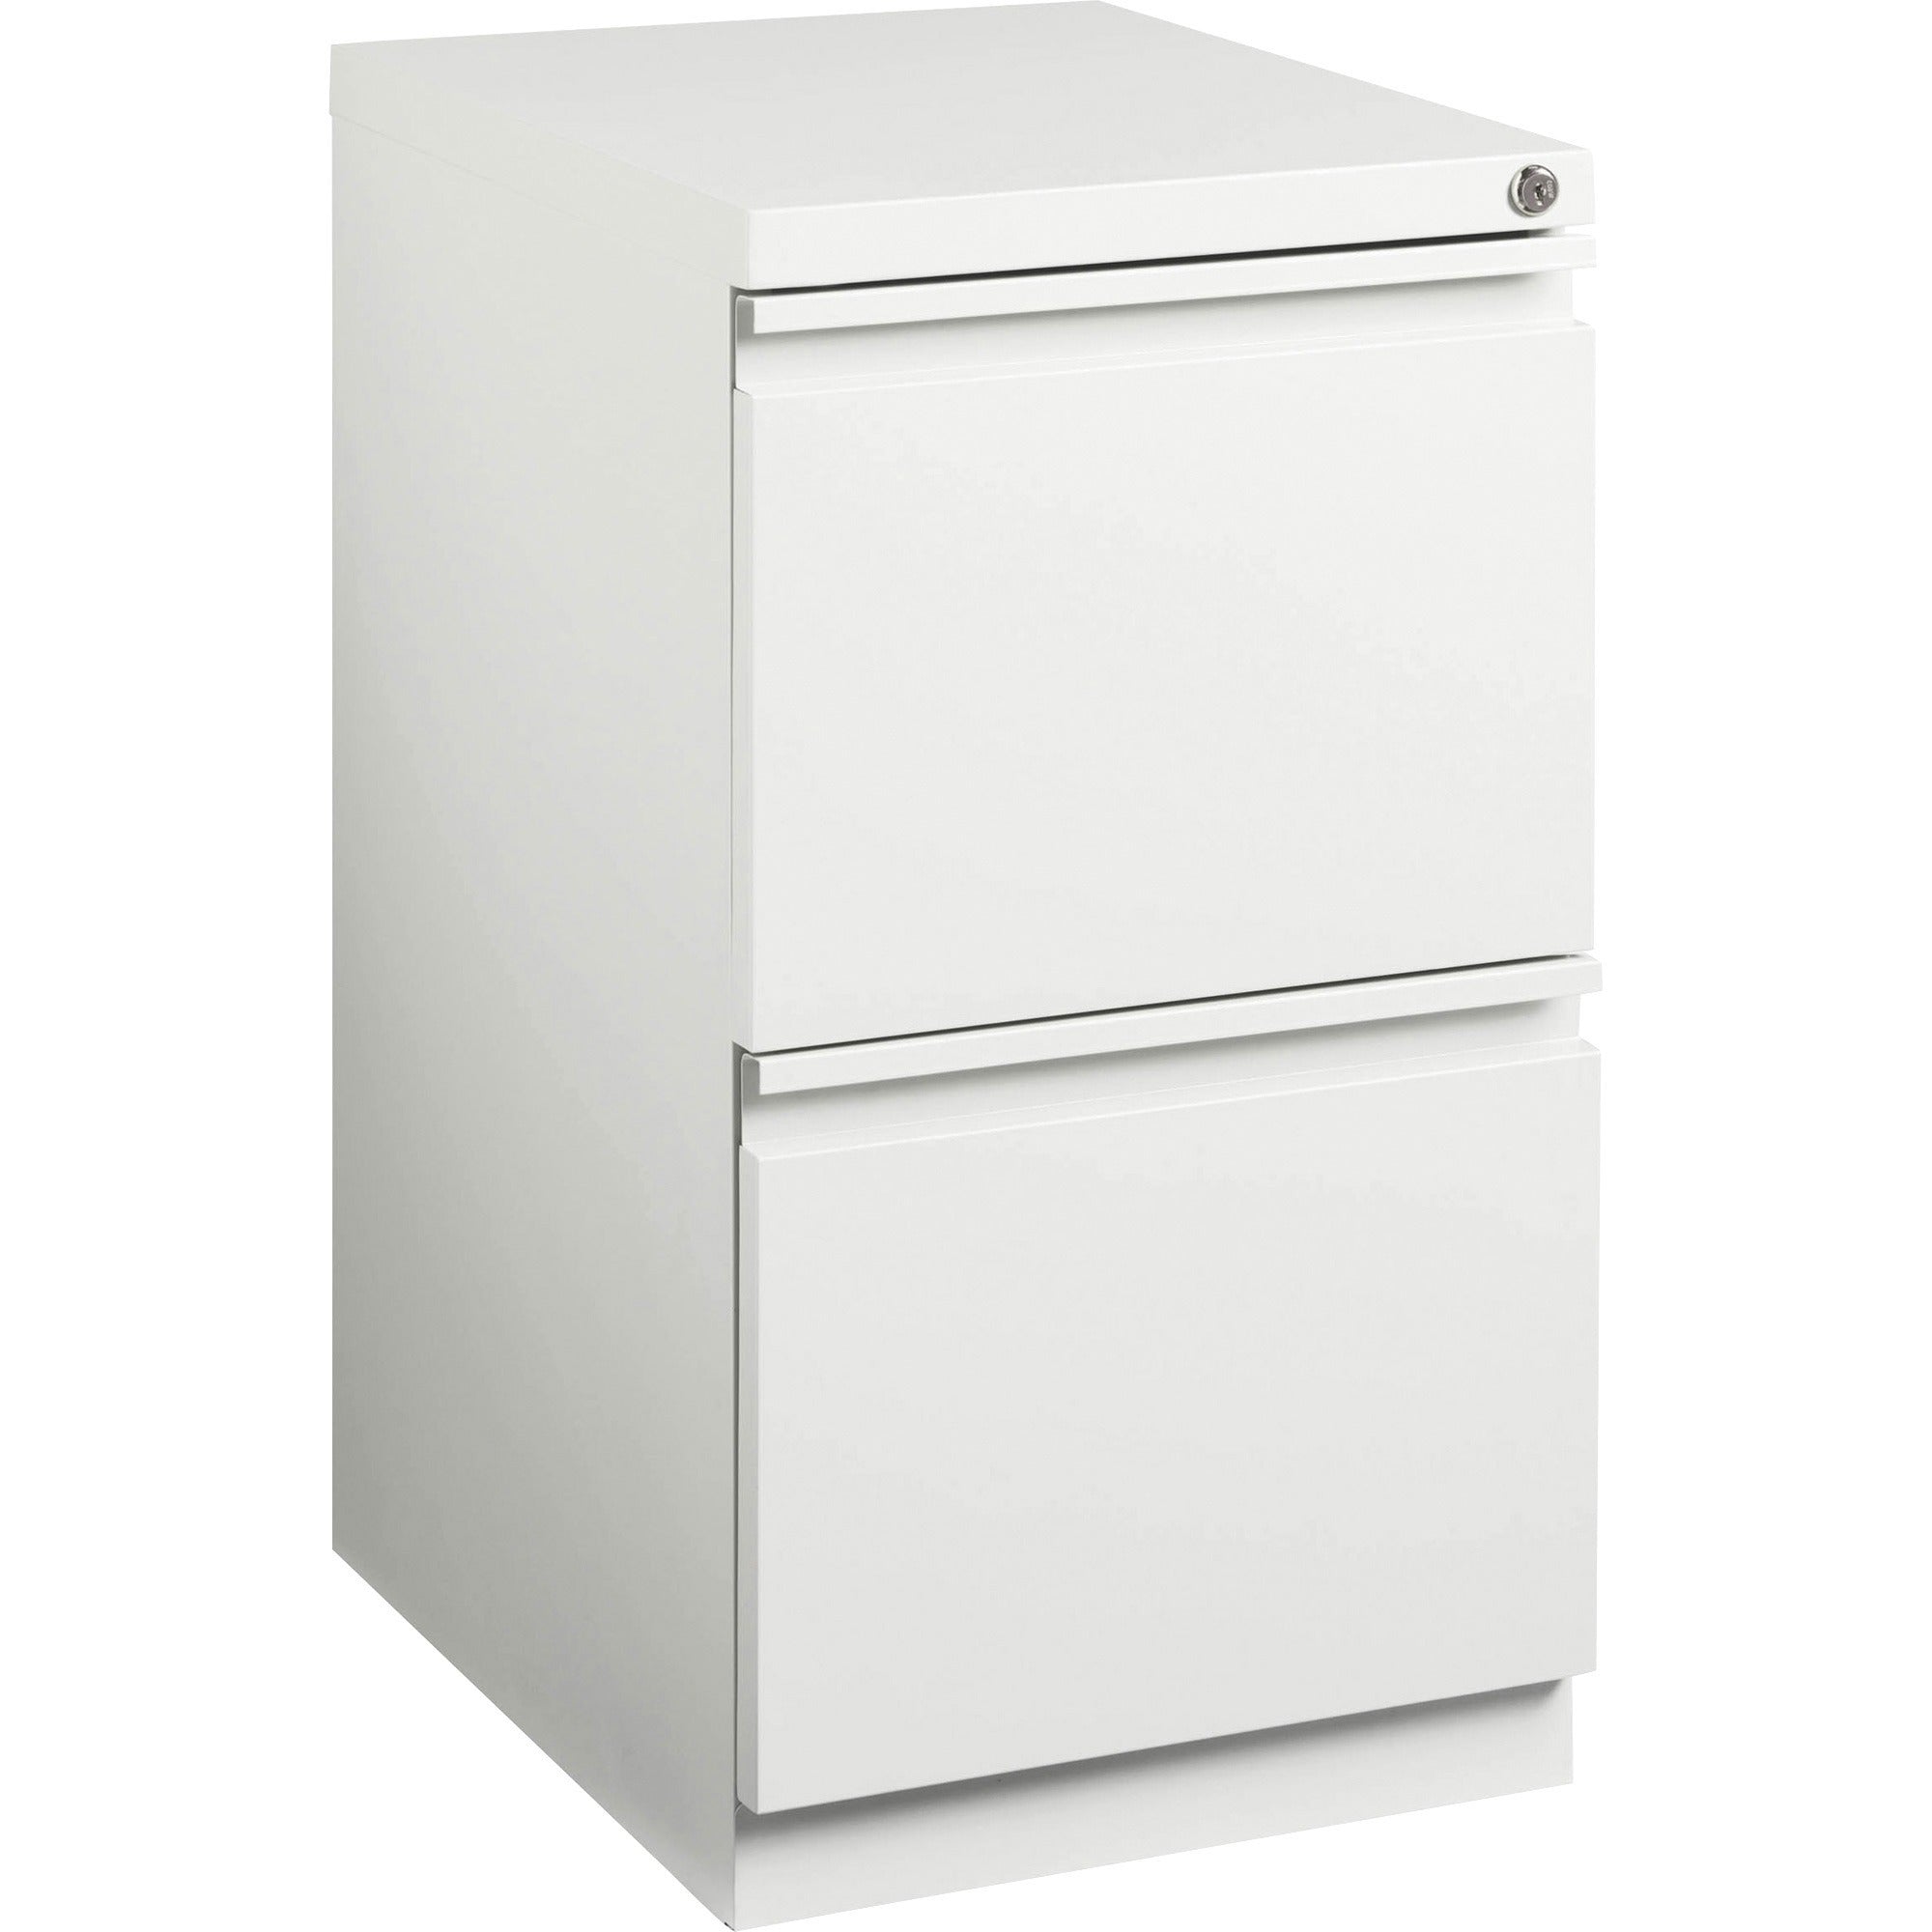 lorell-20-file-file-mobile-file-cabinet-with-full-width-pull-15-x-199-x-278-for-file-letter-mobility-ball-bearing-suspension-removable-lock-pull-out-drawer-recessed-drawer-casters-key-lock-white-steel-recycled_llr00050 - 1